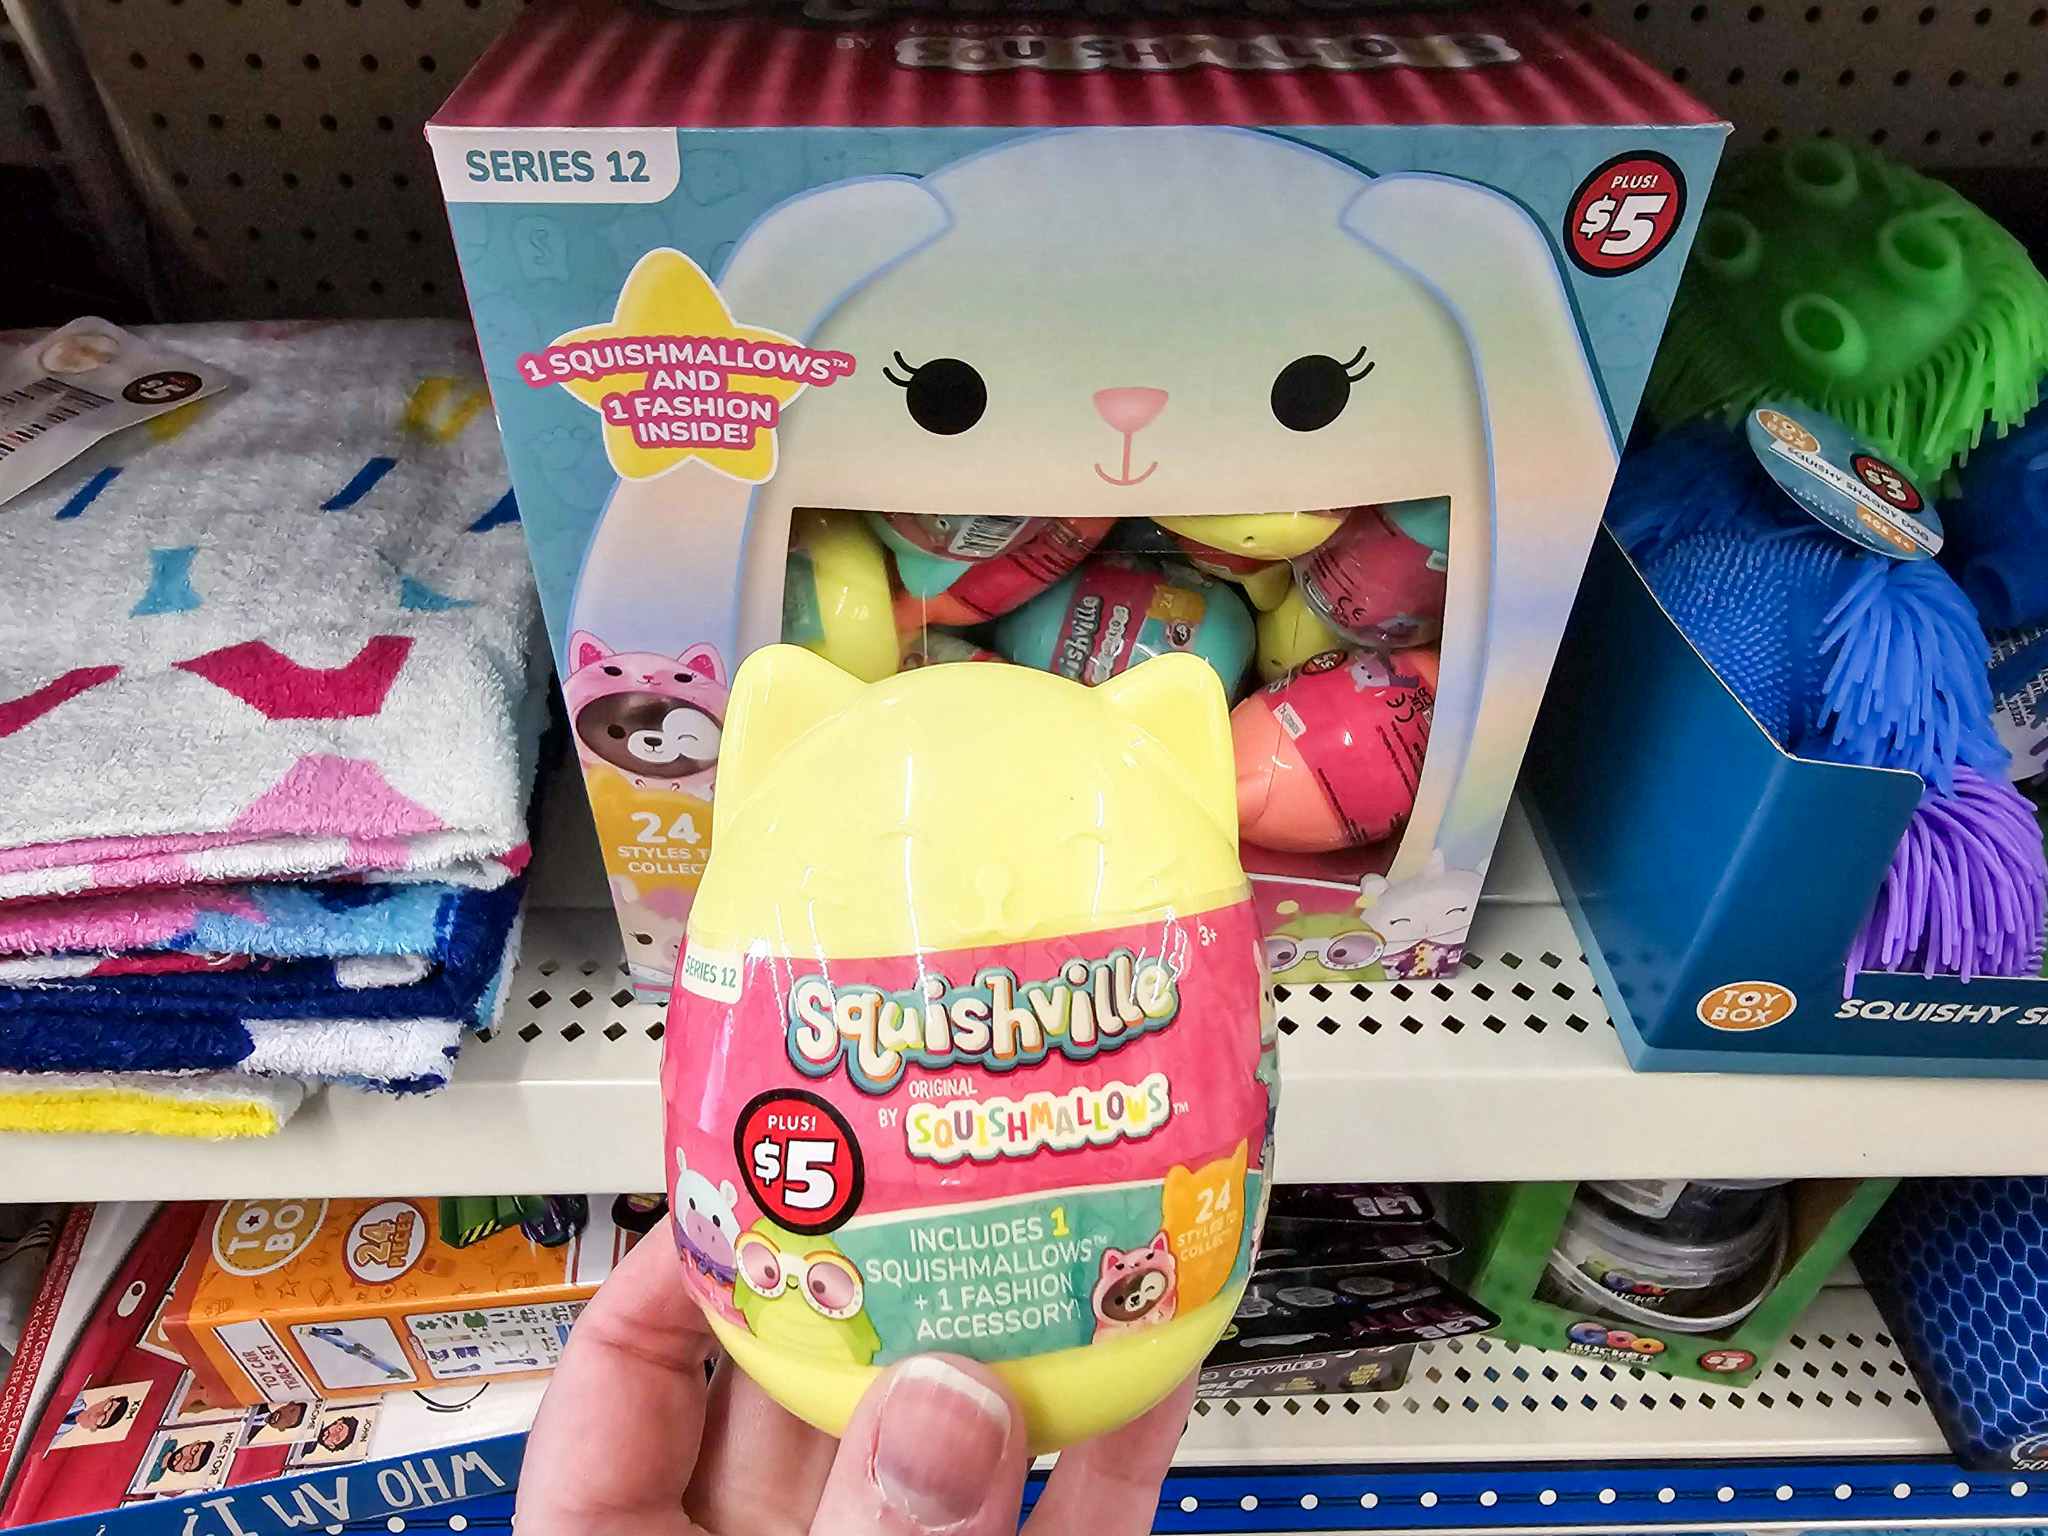 person holding a squishville by squishmallows toy in front of the display box on a shelf